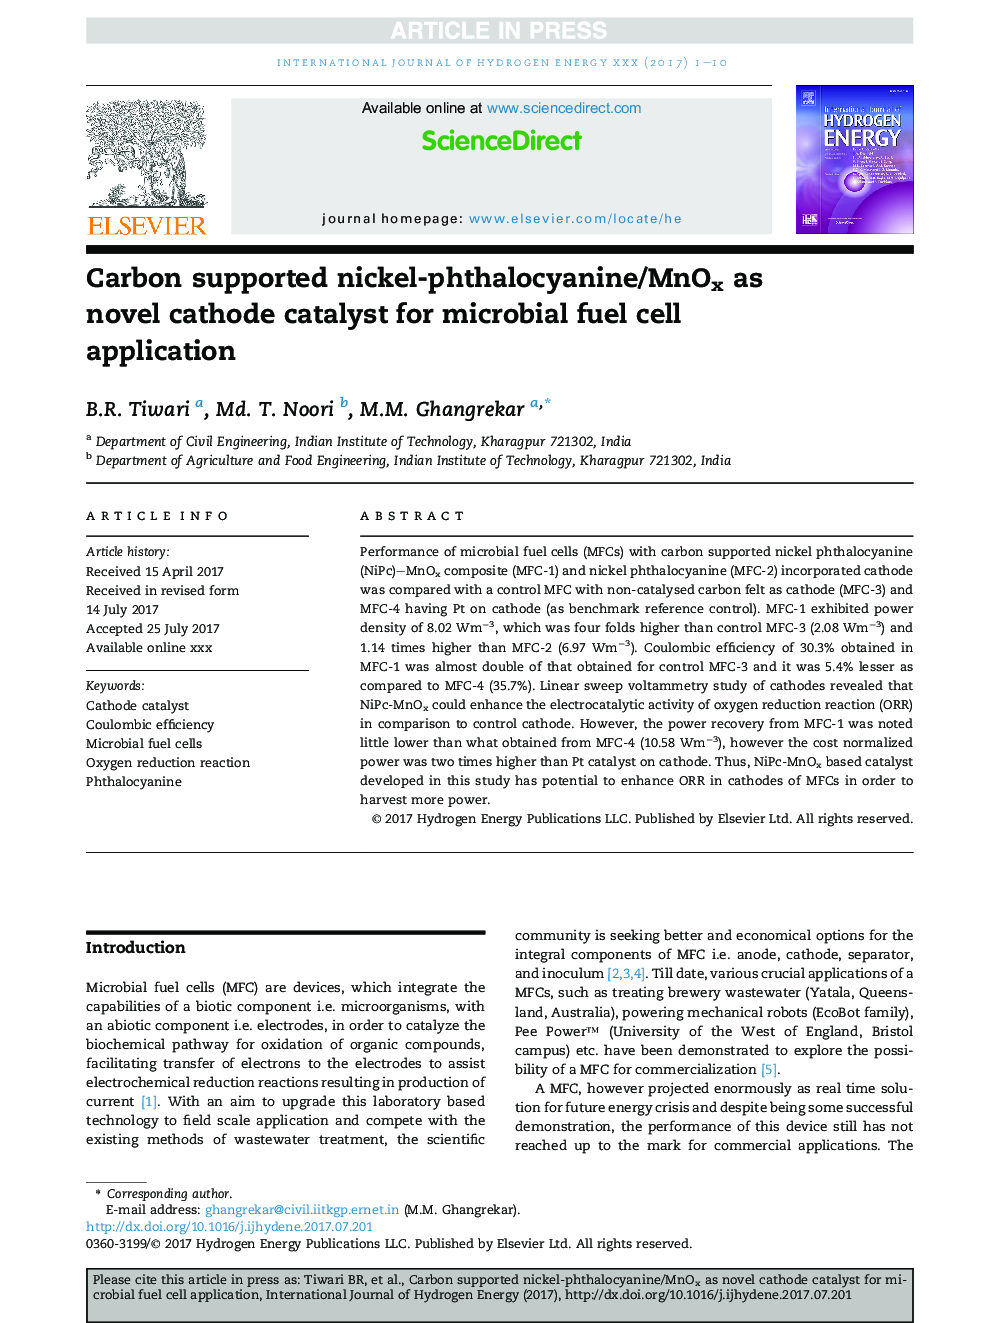 Carbon supported nickel-phthalocyanine/MnOx as novel cathode catalyst for microbial fuel cell application